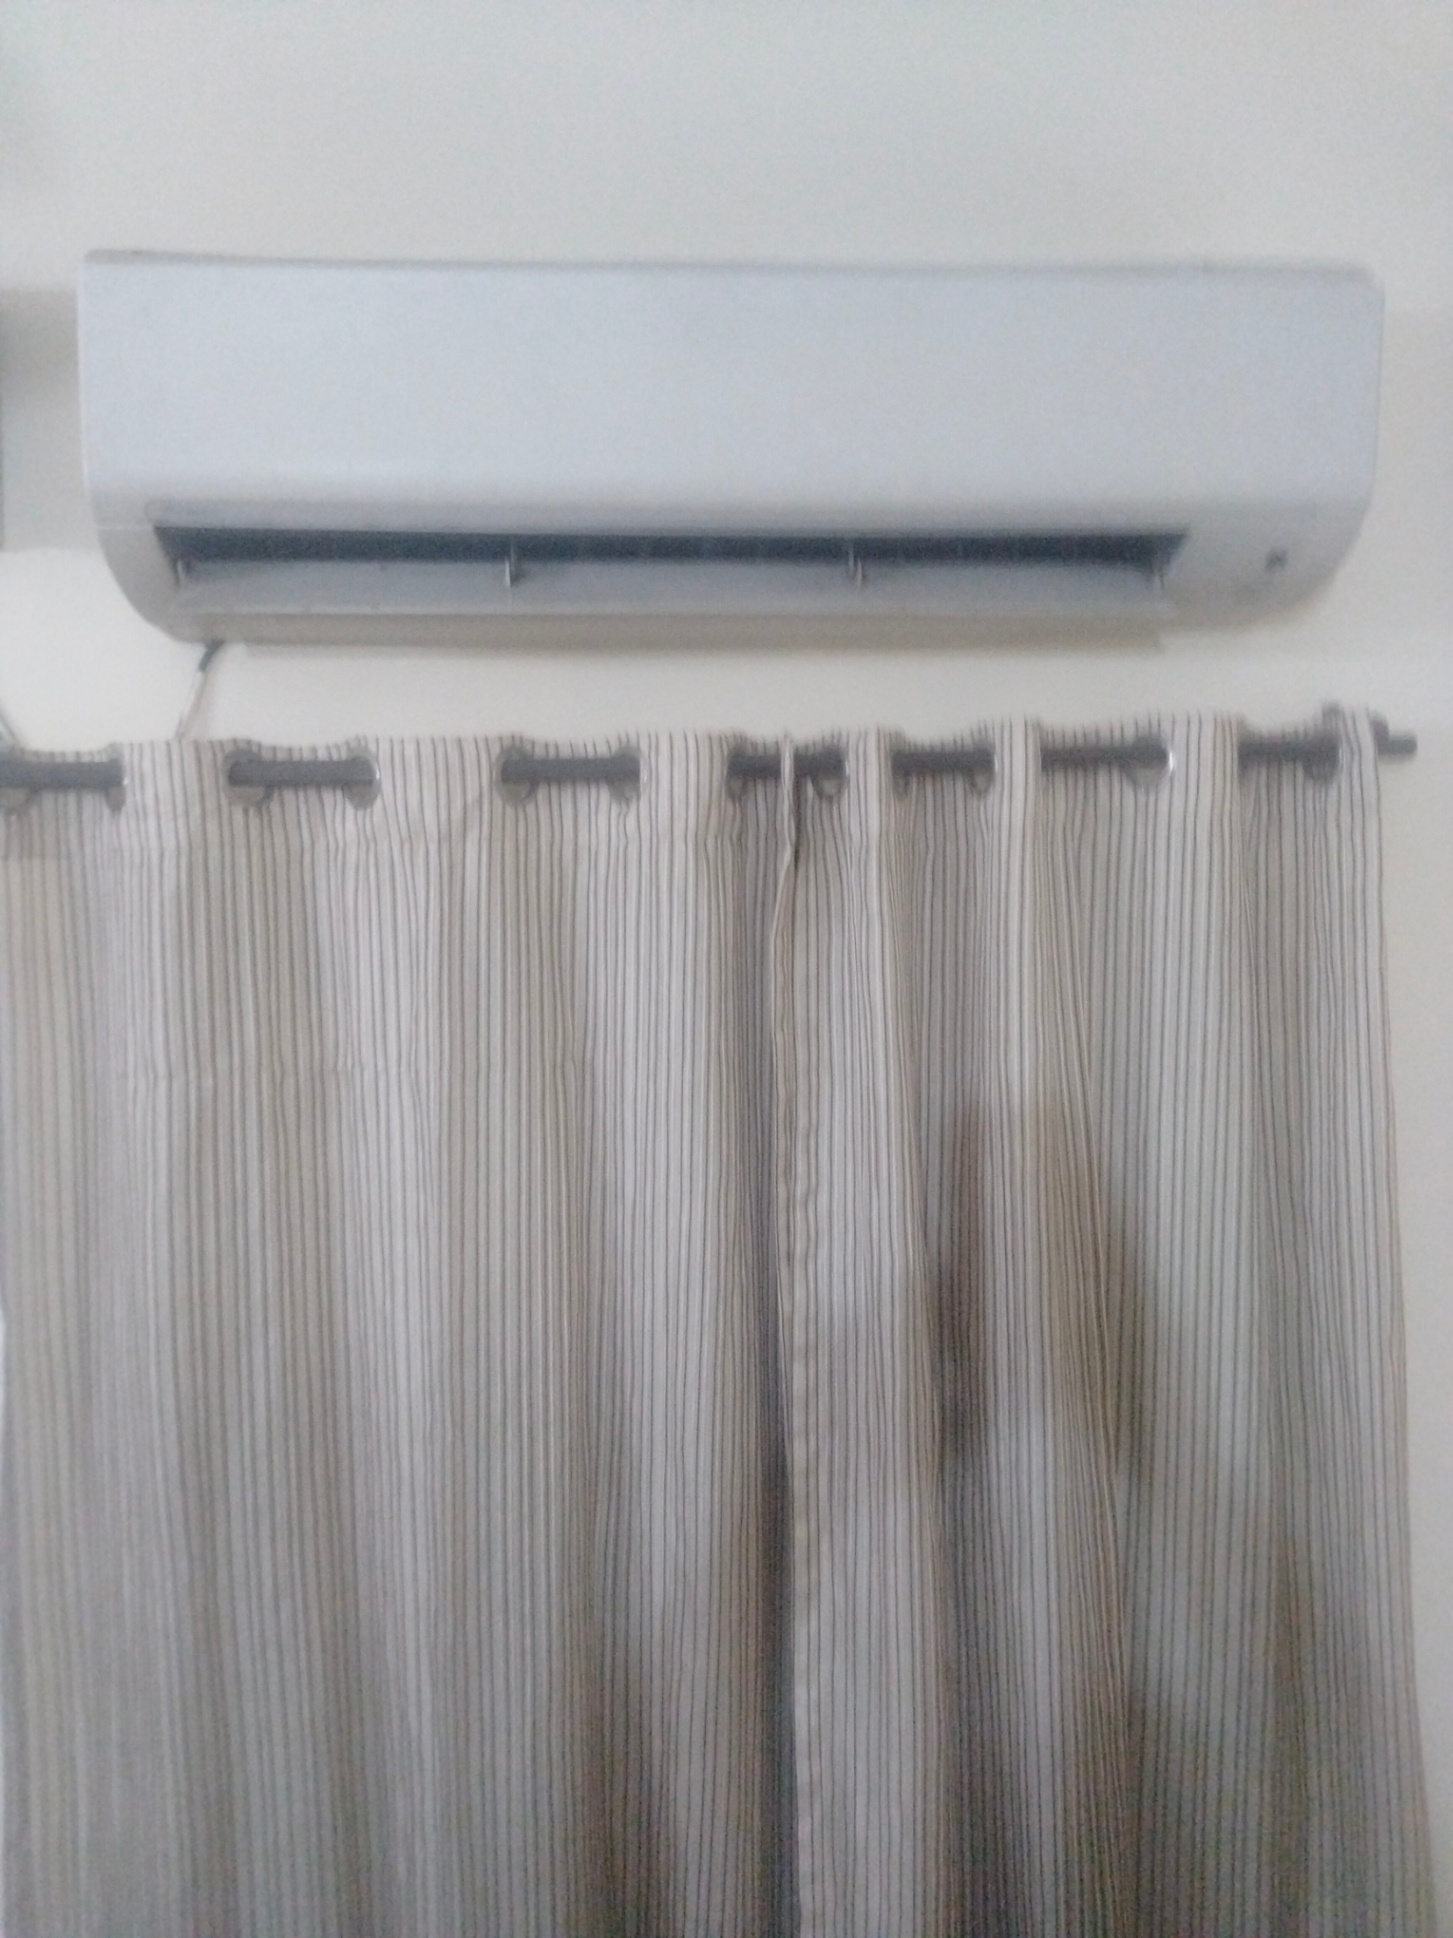 Available Split Acs & Window Acs On RENT AT MUMBAI AREAS ONLY. 